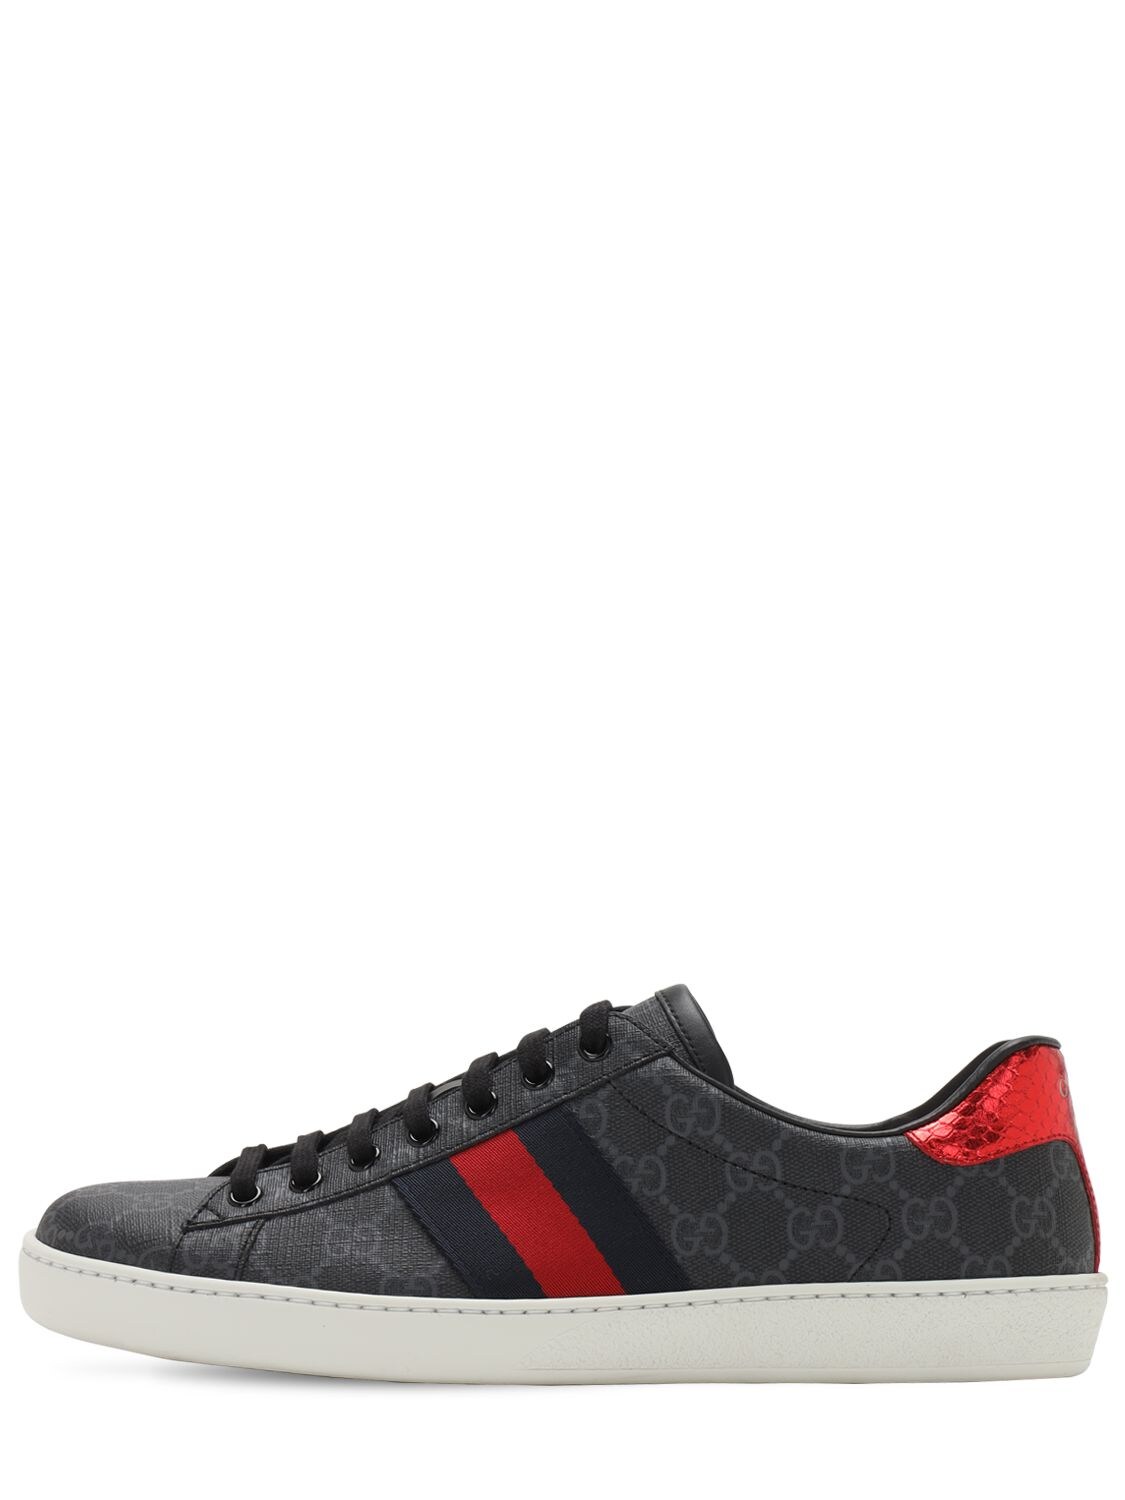 Shop Gucci New Ace Coated Gg Supreme Sneakers In Black